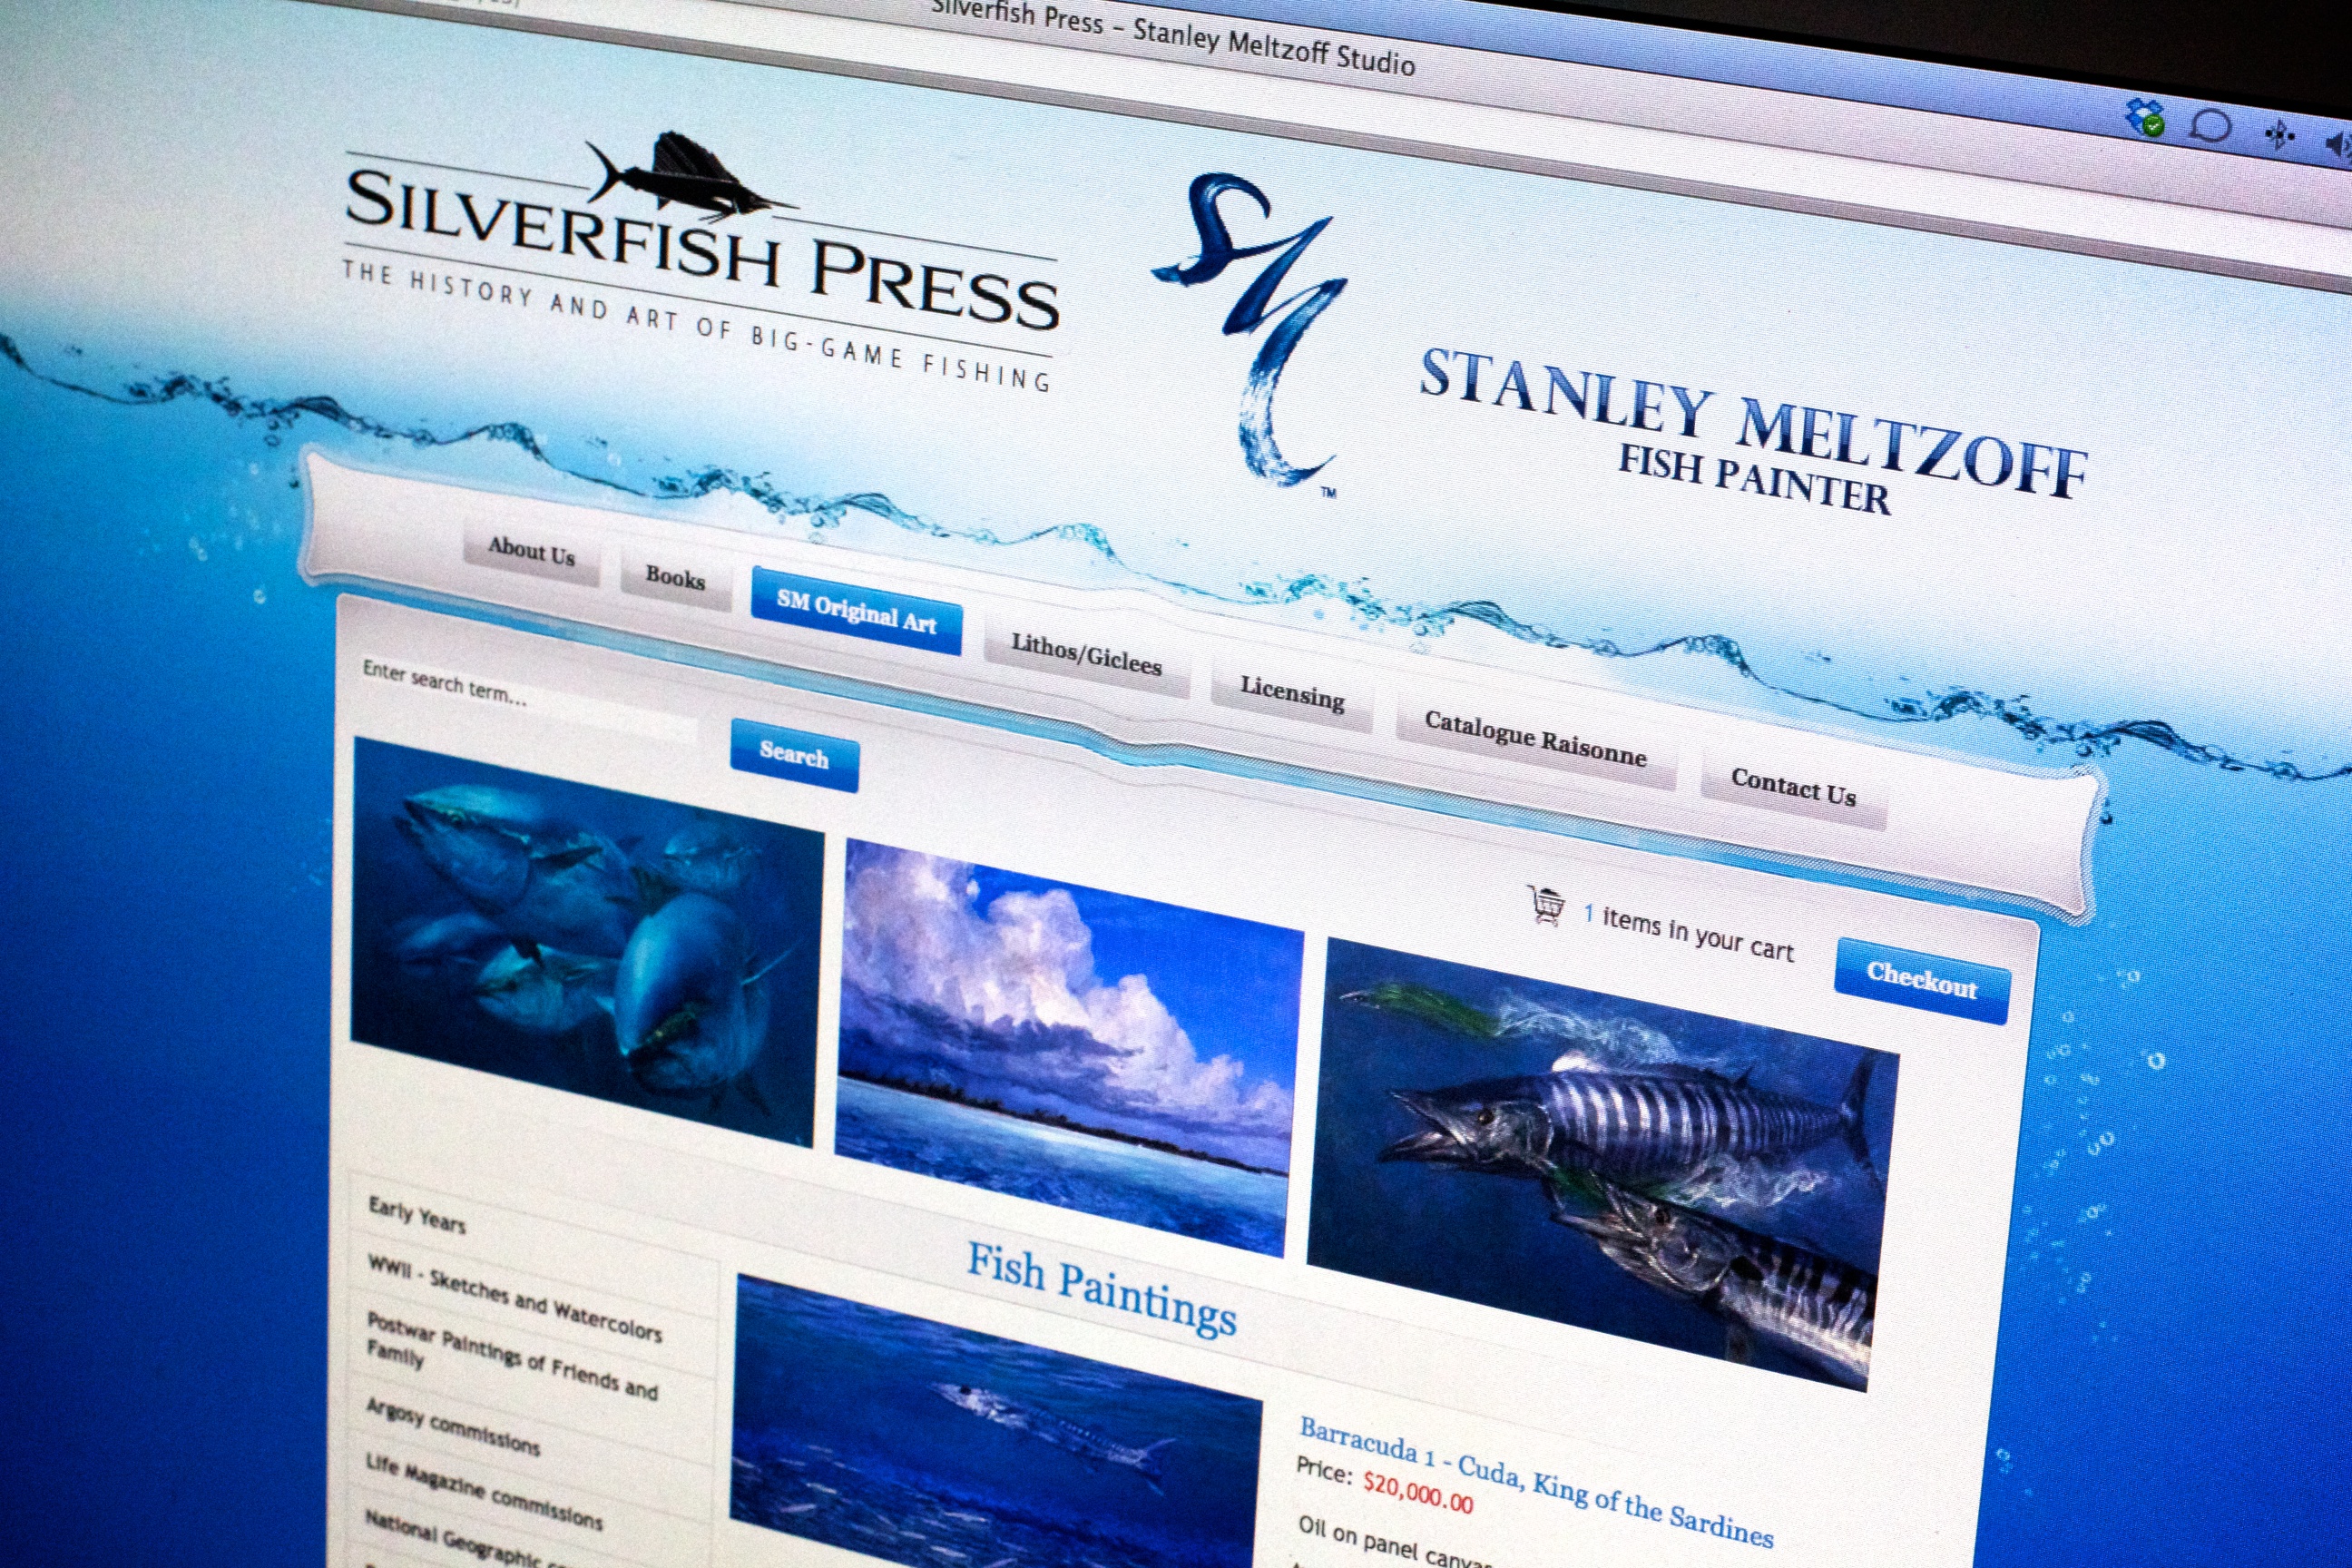 Silverfish Press Website - do you need a new website?